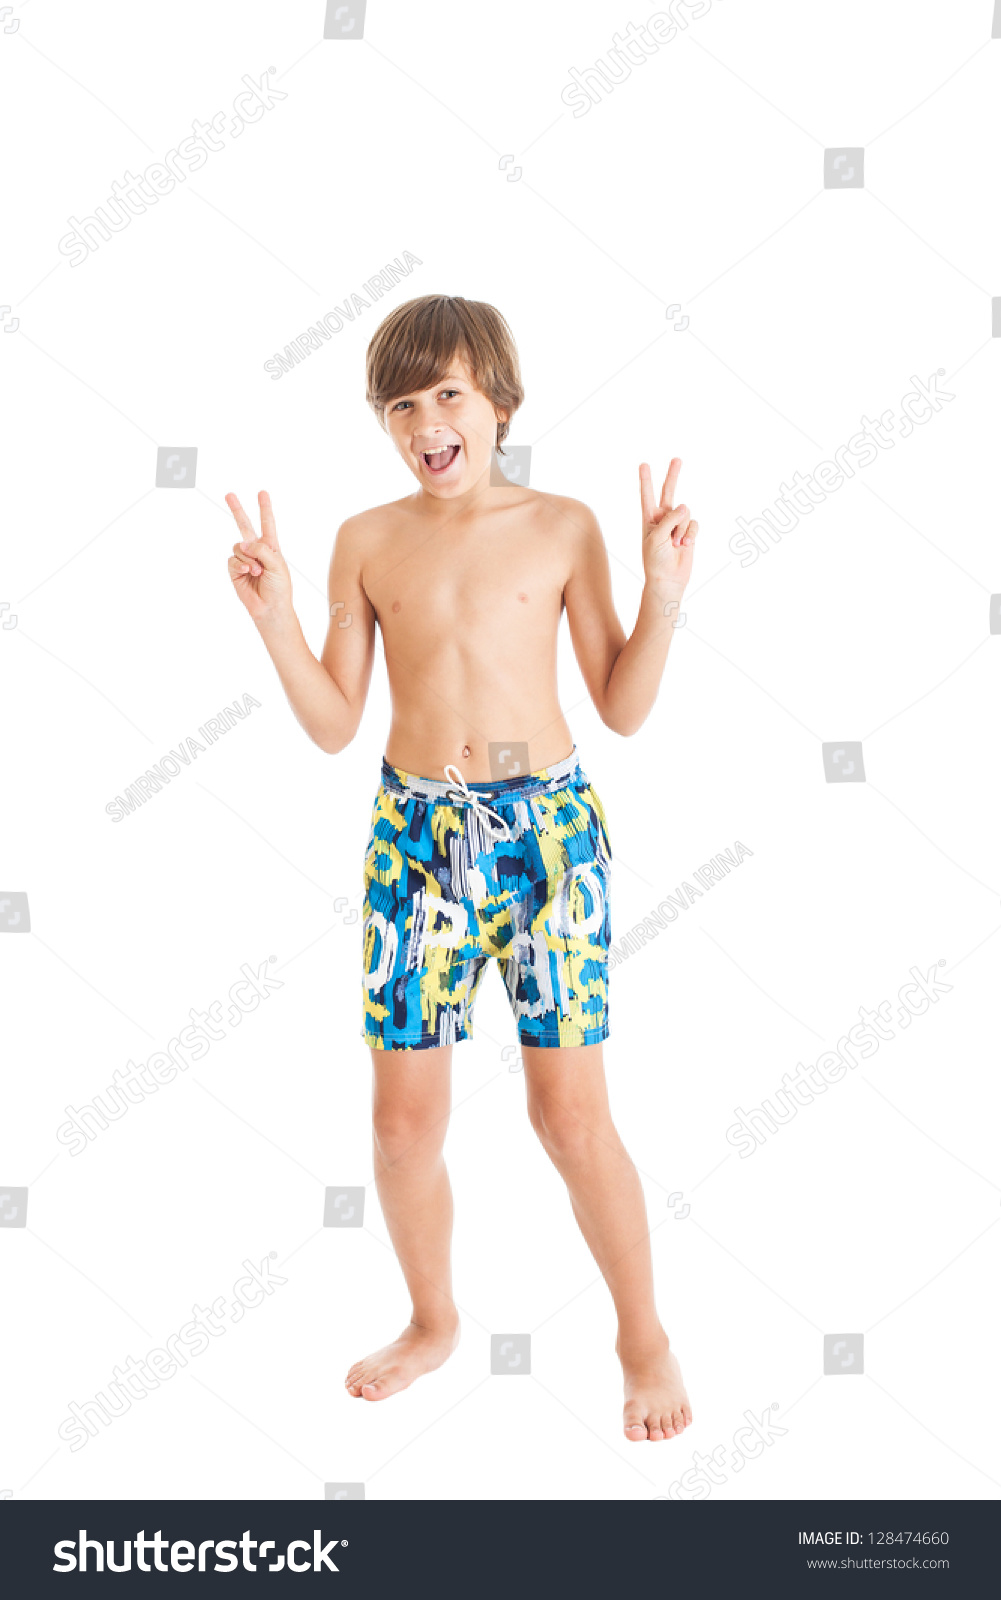 Pretty Slender Teenage Boy Wearing Swimming Shorts, Shows Signs Of ...